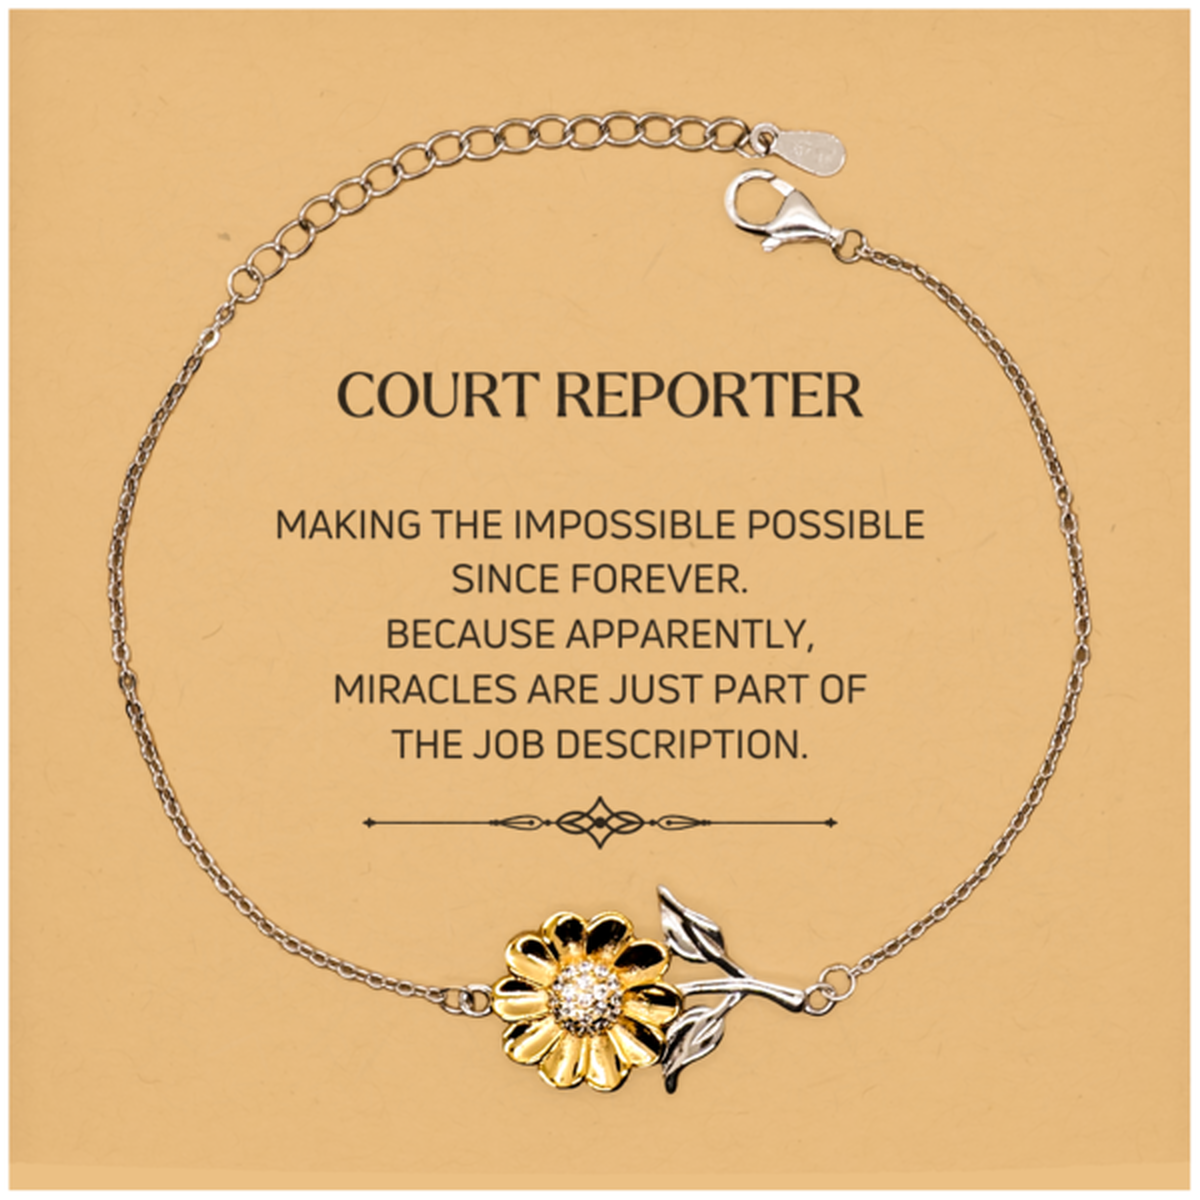 Funny Court Reporter Gifts, Miracles are just part of the job description, Inspirational Birthday Christmas Sunflower Bracelet For Court Reporter, Men, Women, Coworkers, Friends, Boss